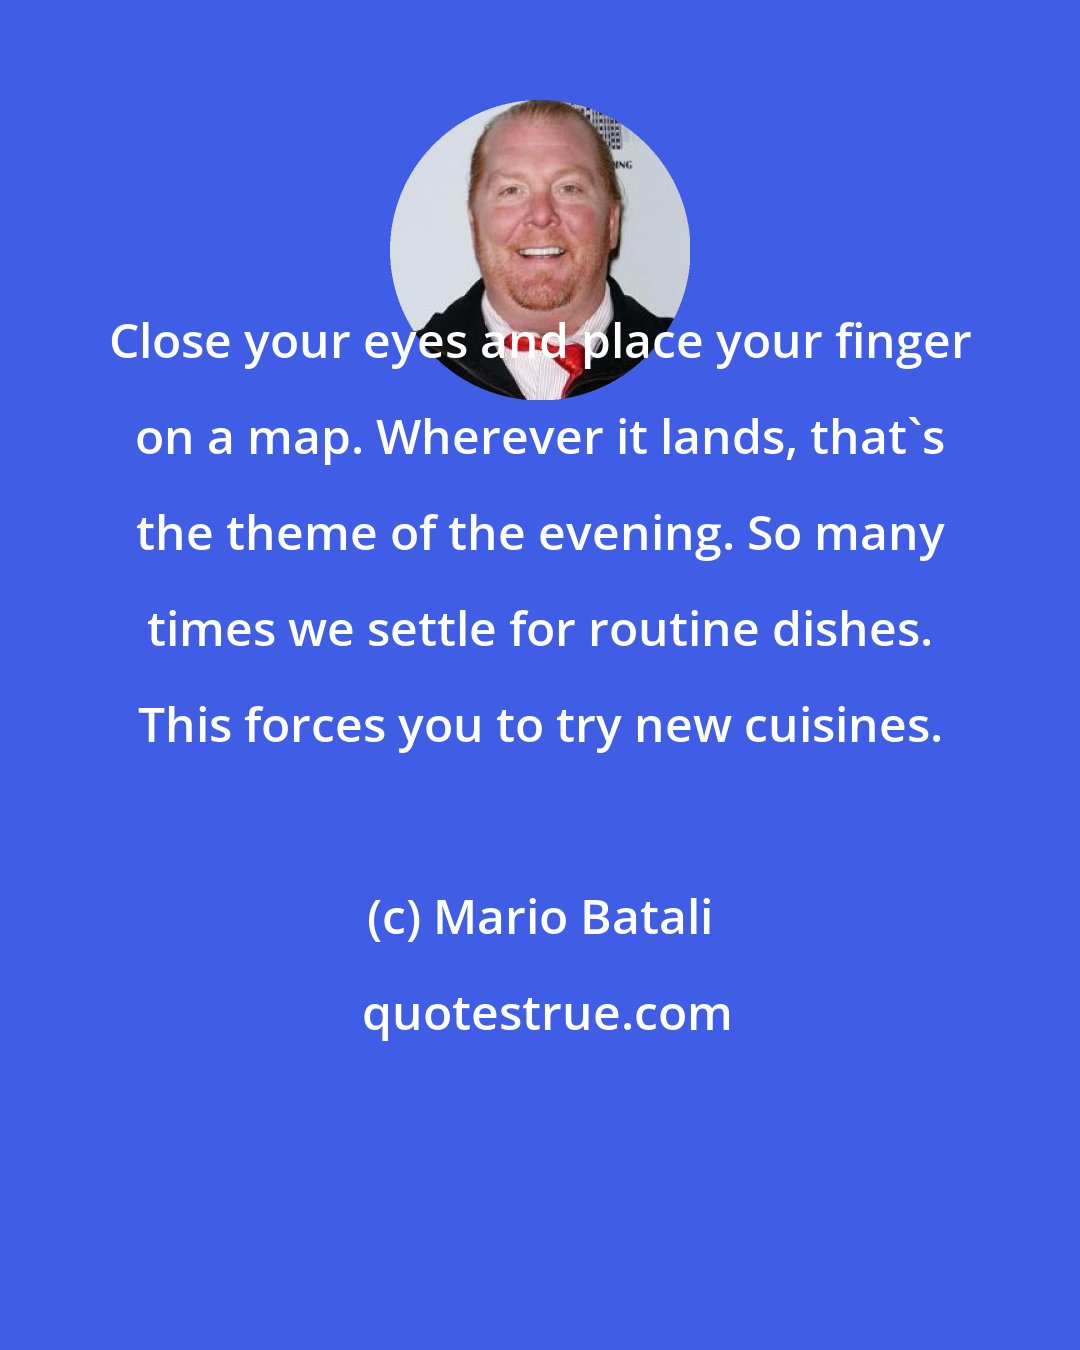 Mario Batali: Close your eyes and place your finger on a map. Wherever it lands, that's the theme of the evening. So many times we settle for routine dishes. This forces you to try new cuisines.